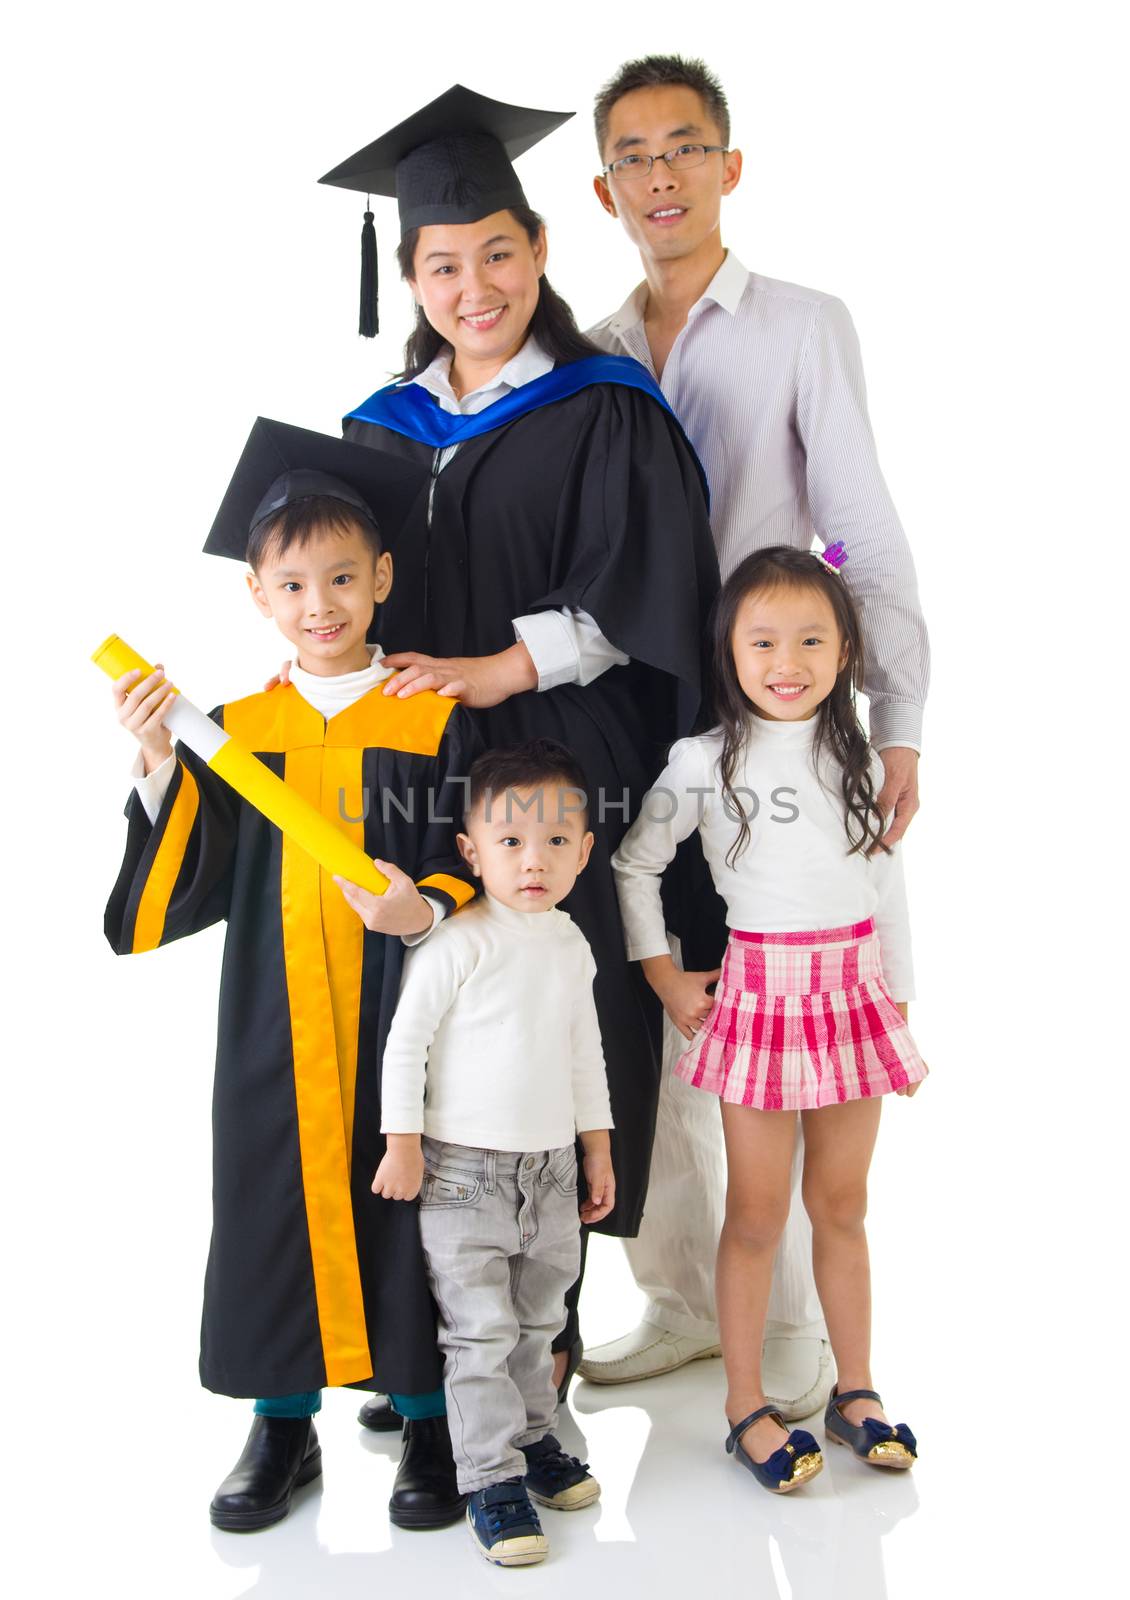 Asian mother and son in graduation gown.Taking photo with family.